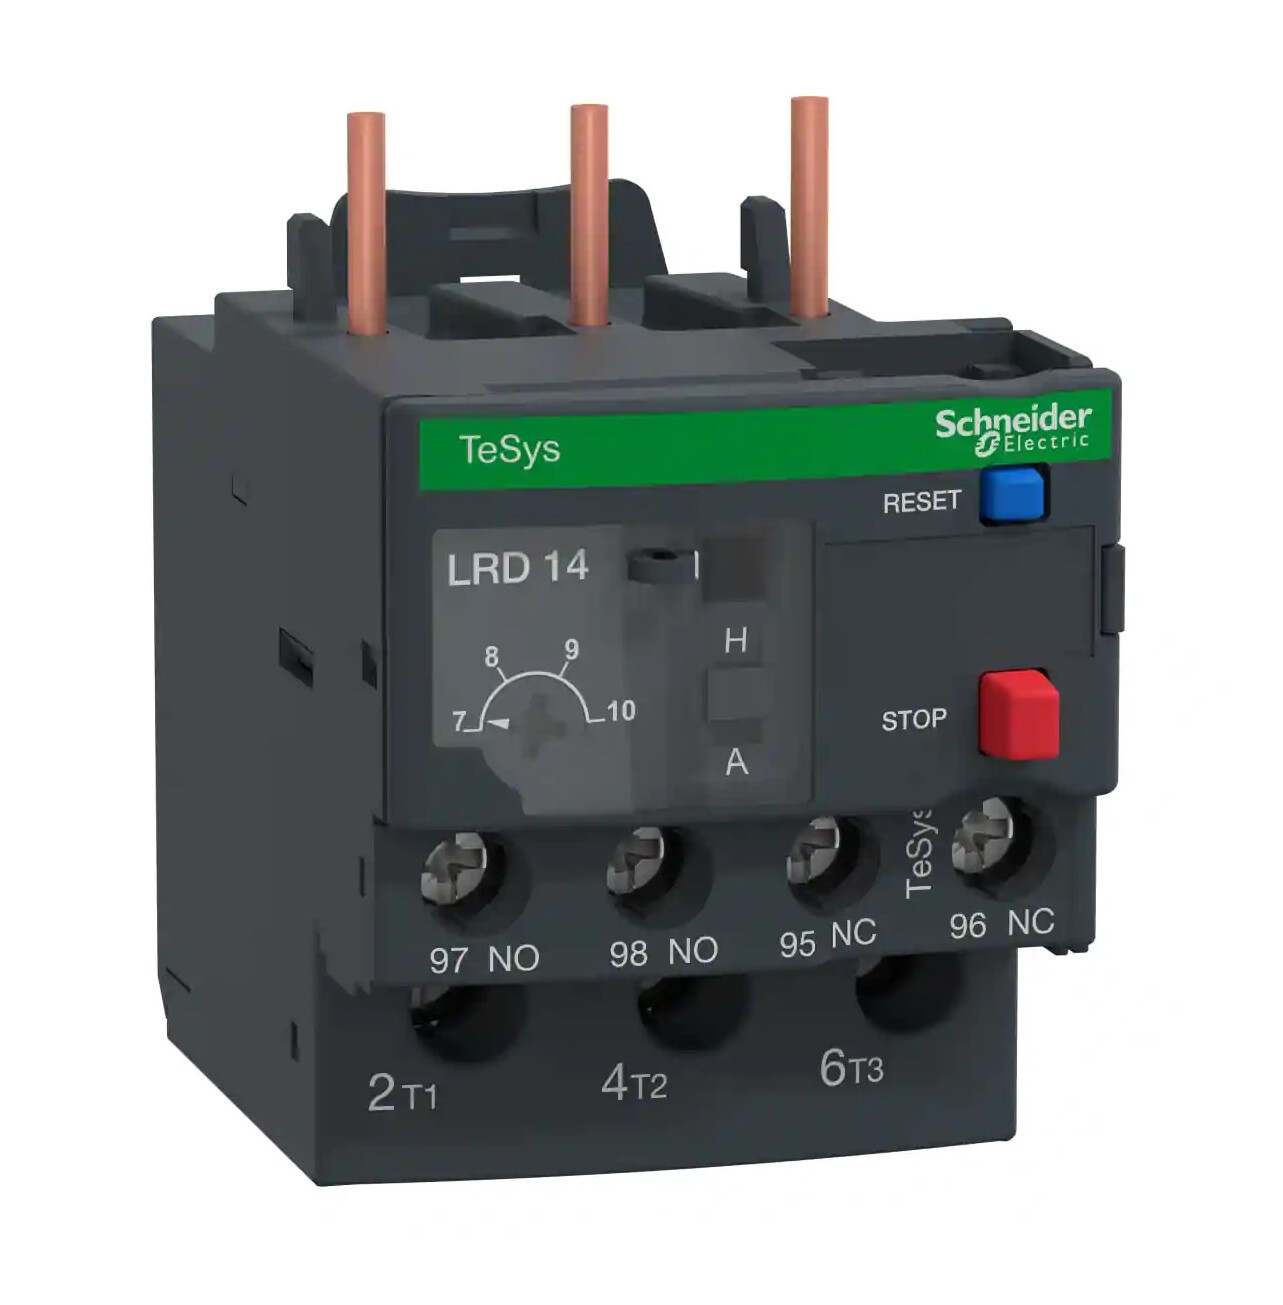 LRD14 Schneider Electric TeSys LRD thermal overload relays - 7...10 A - class 10